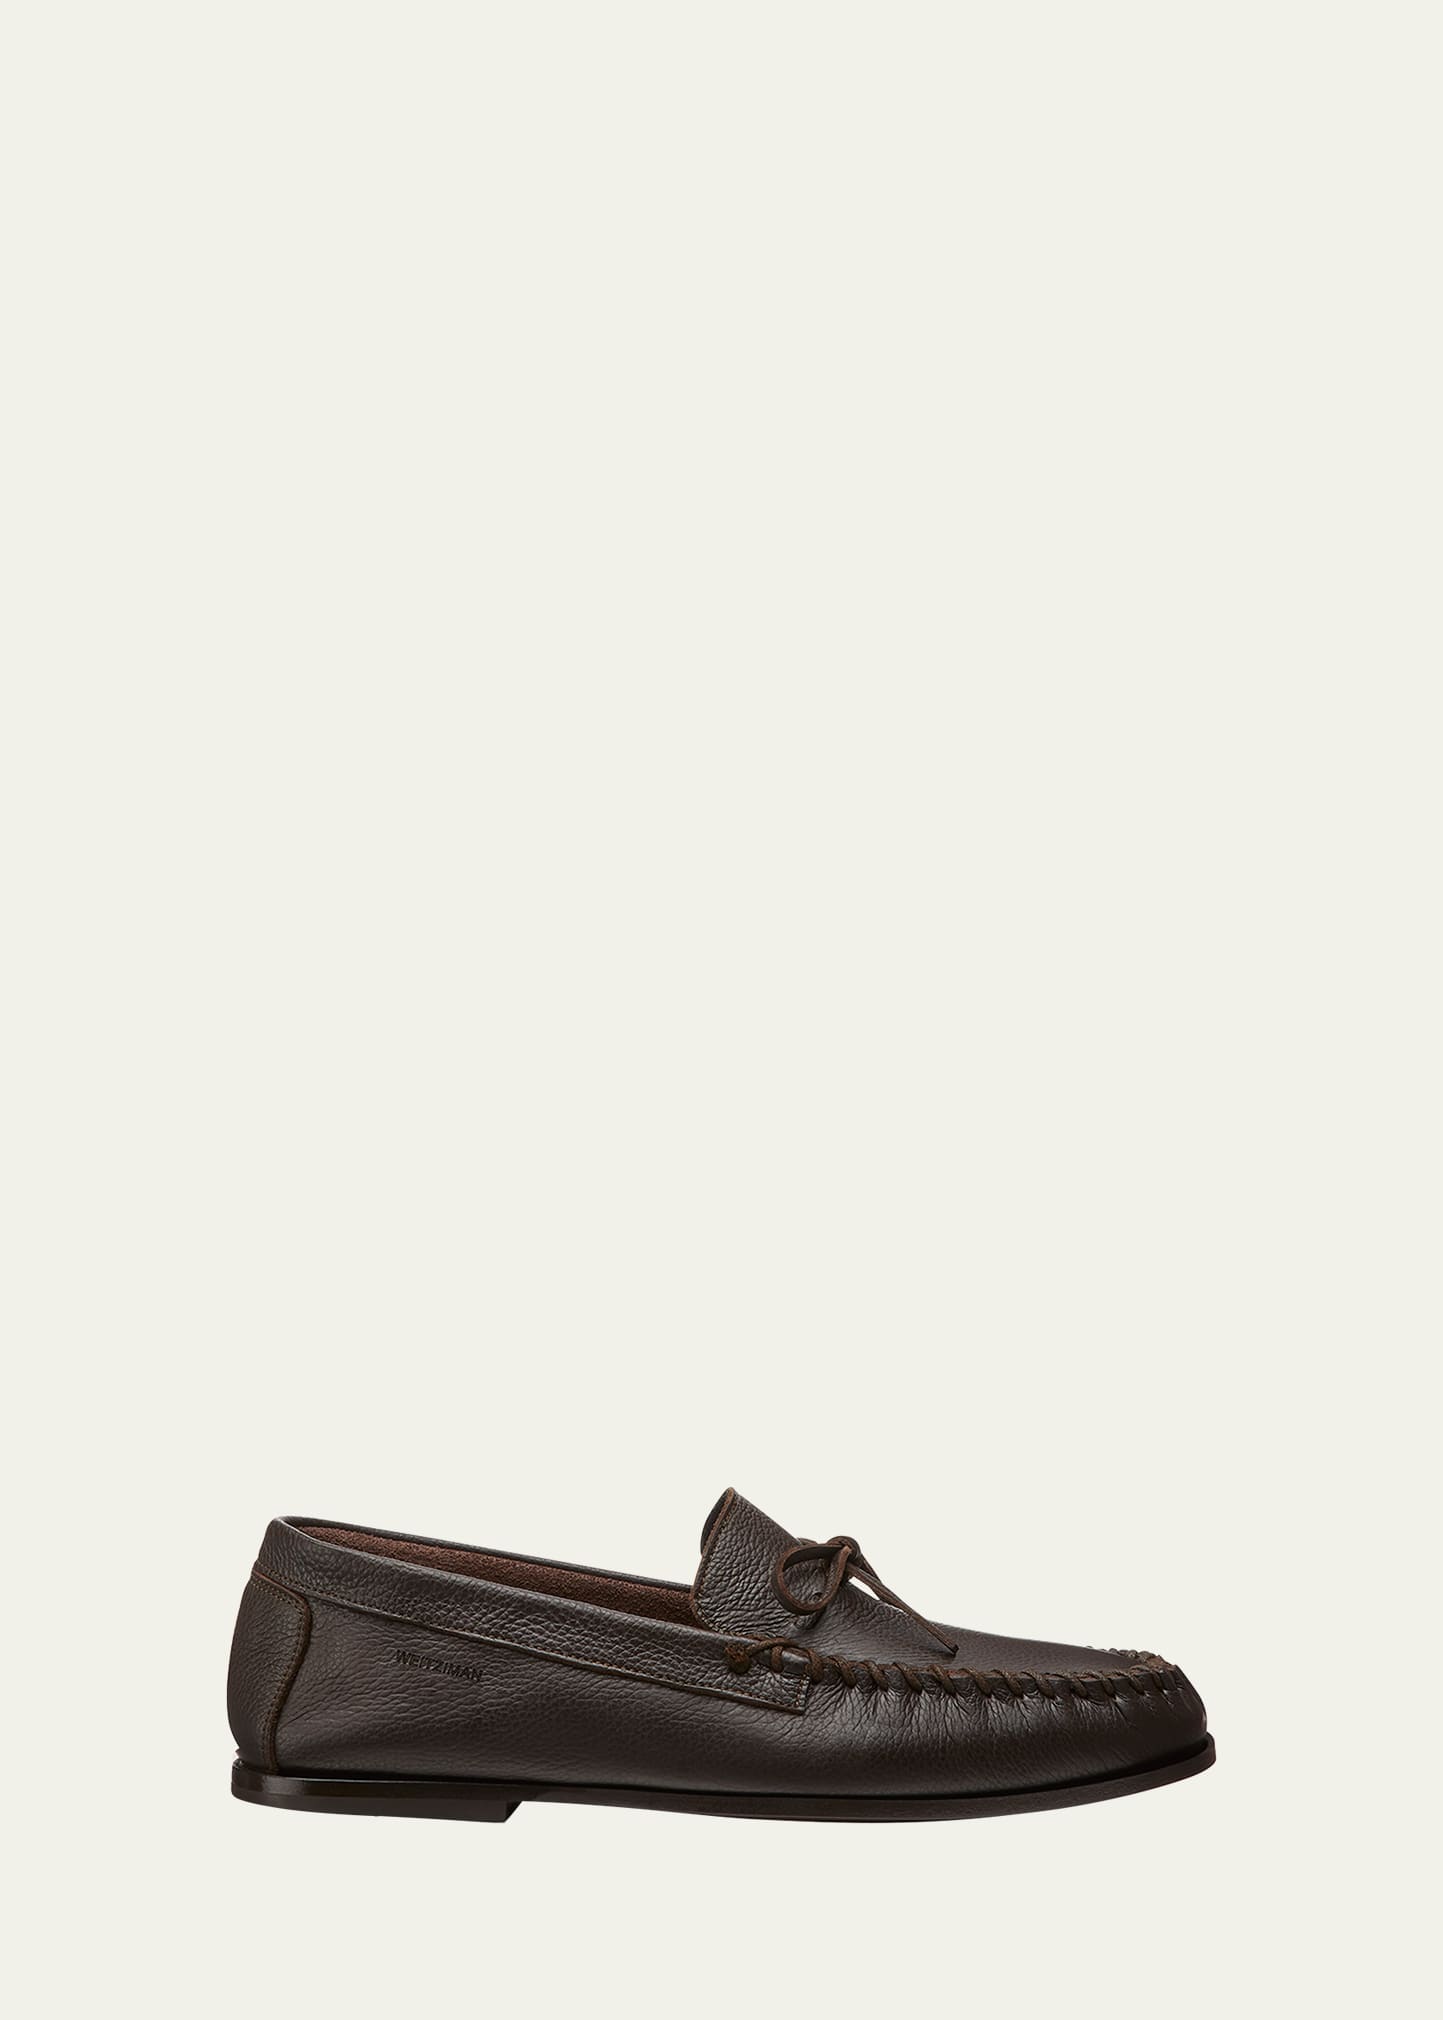 Men's Montauk Grained Leather Moccasin Loafers